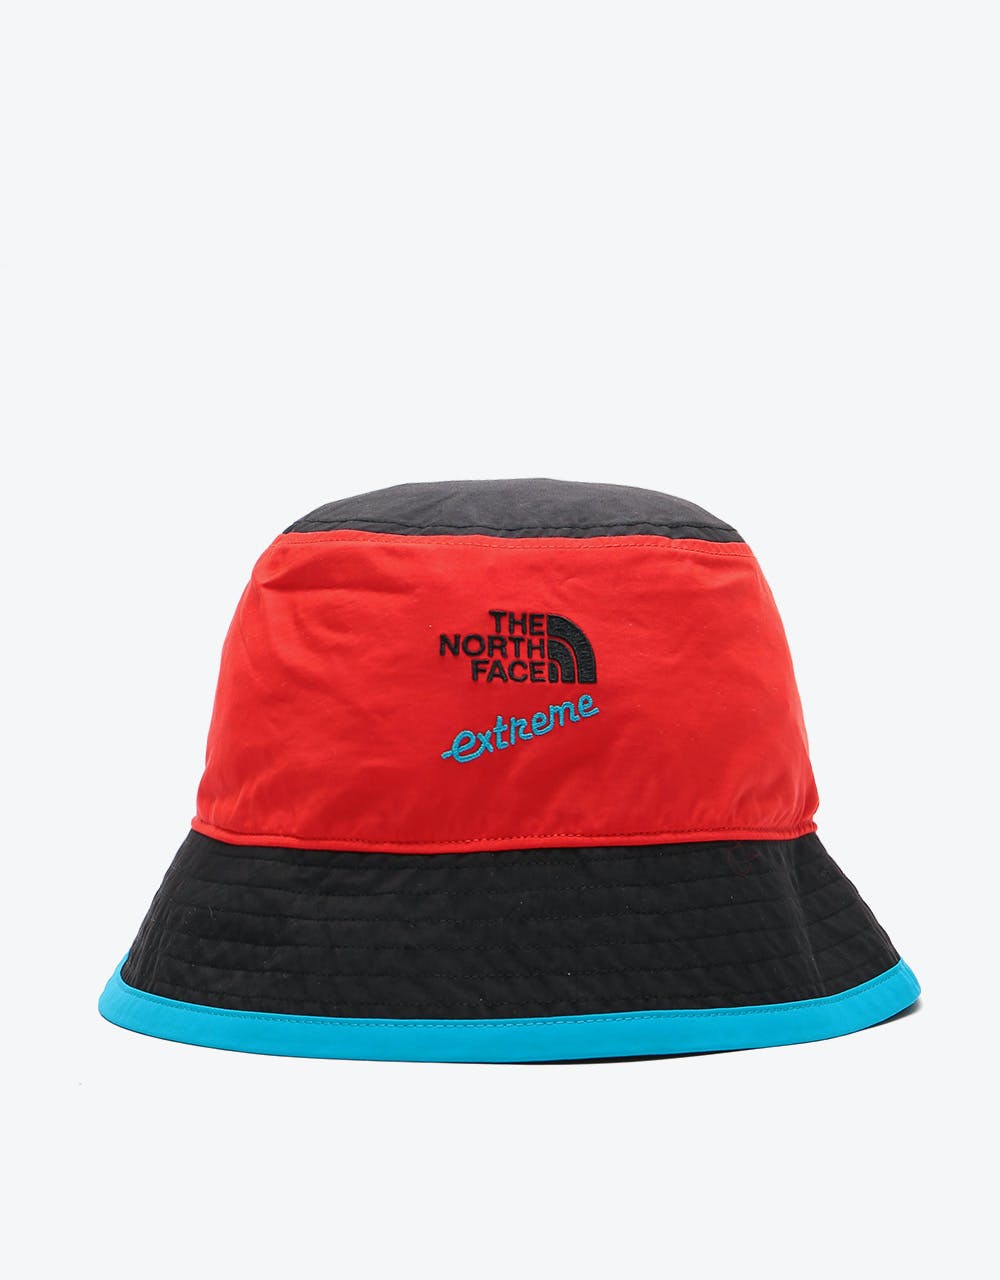 The North Face Cypress Bucket Hat - Fiery Red